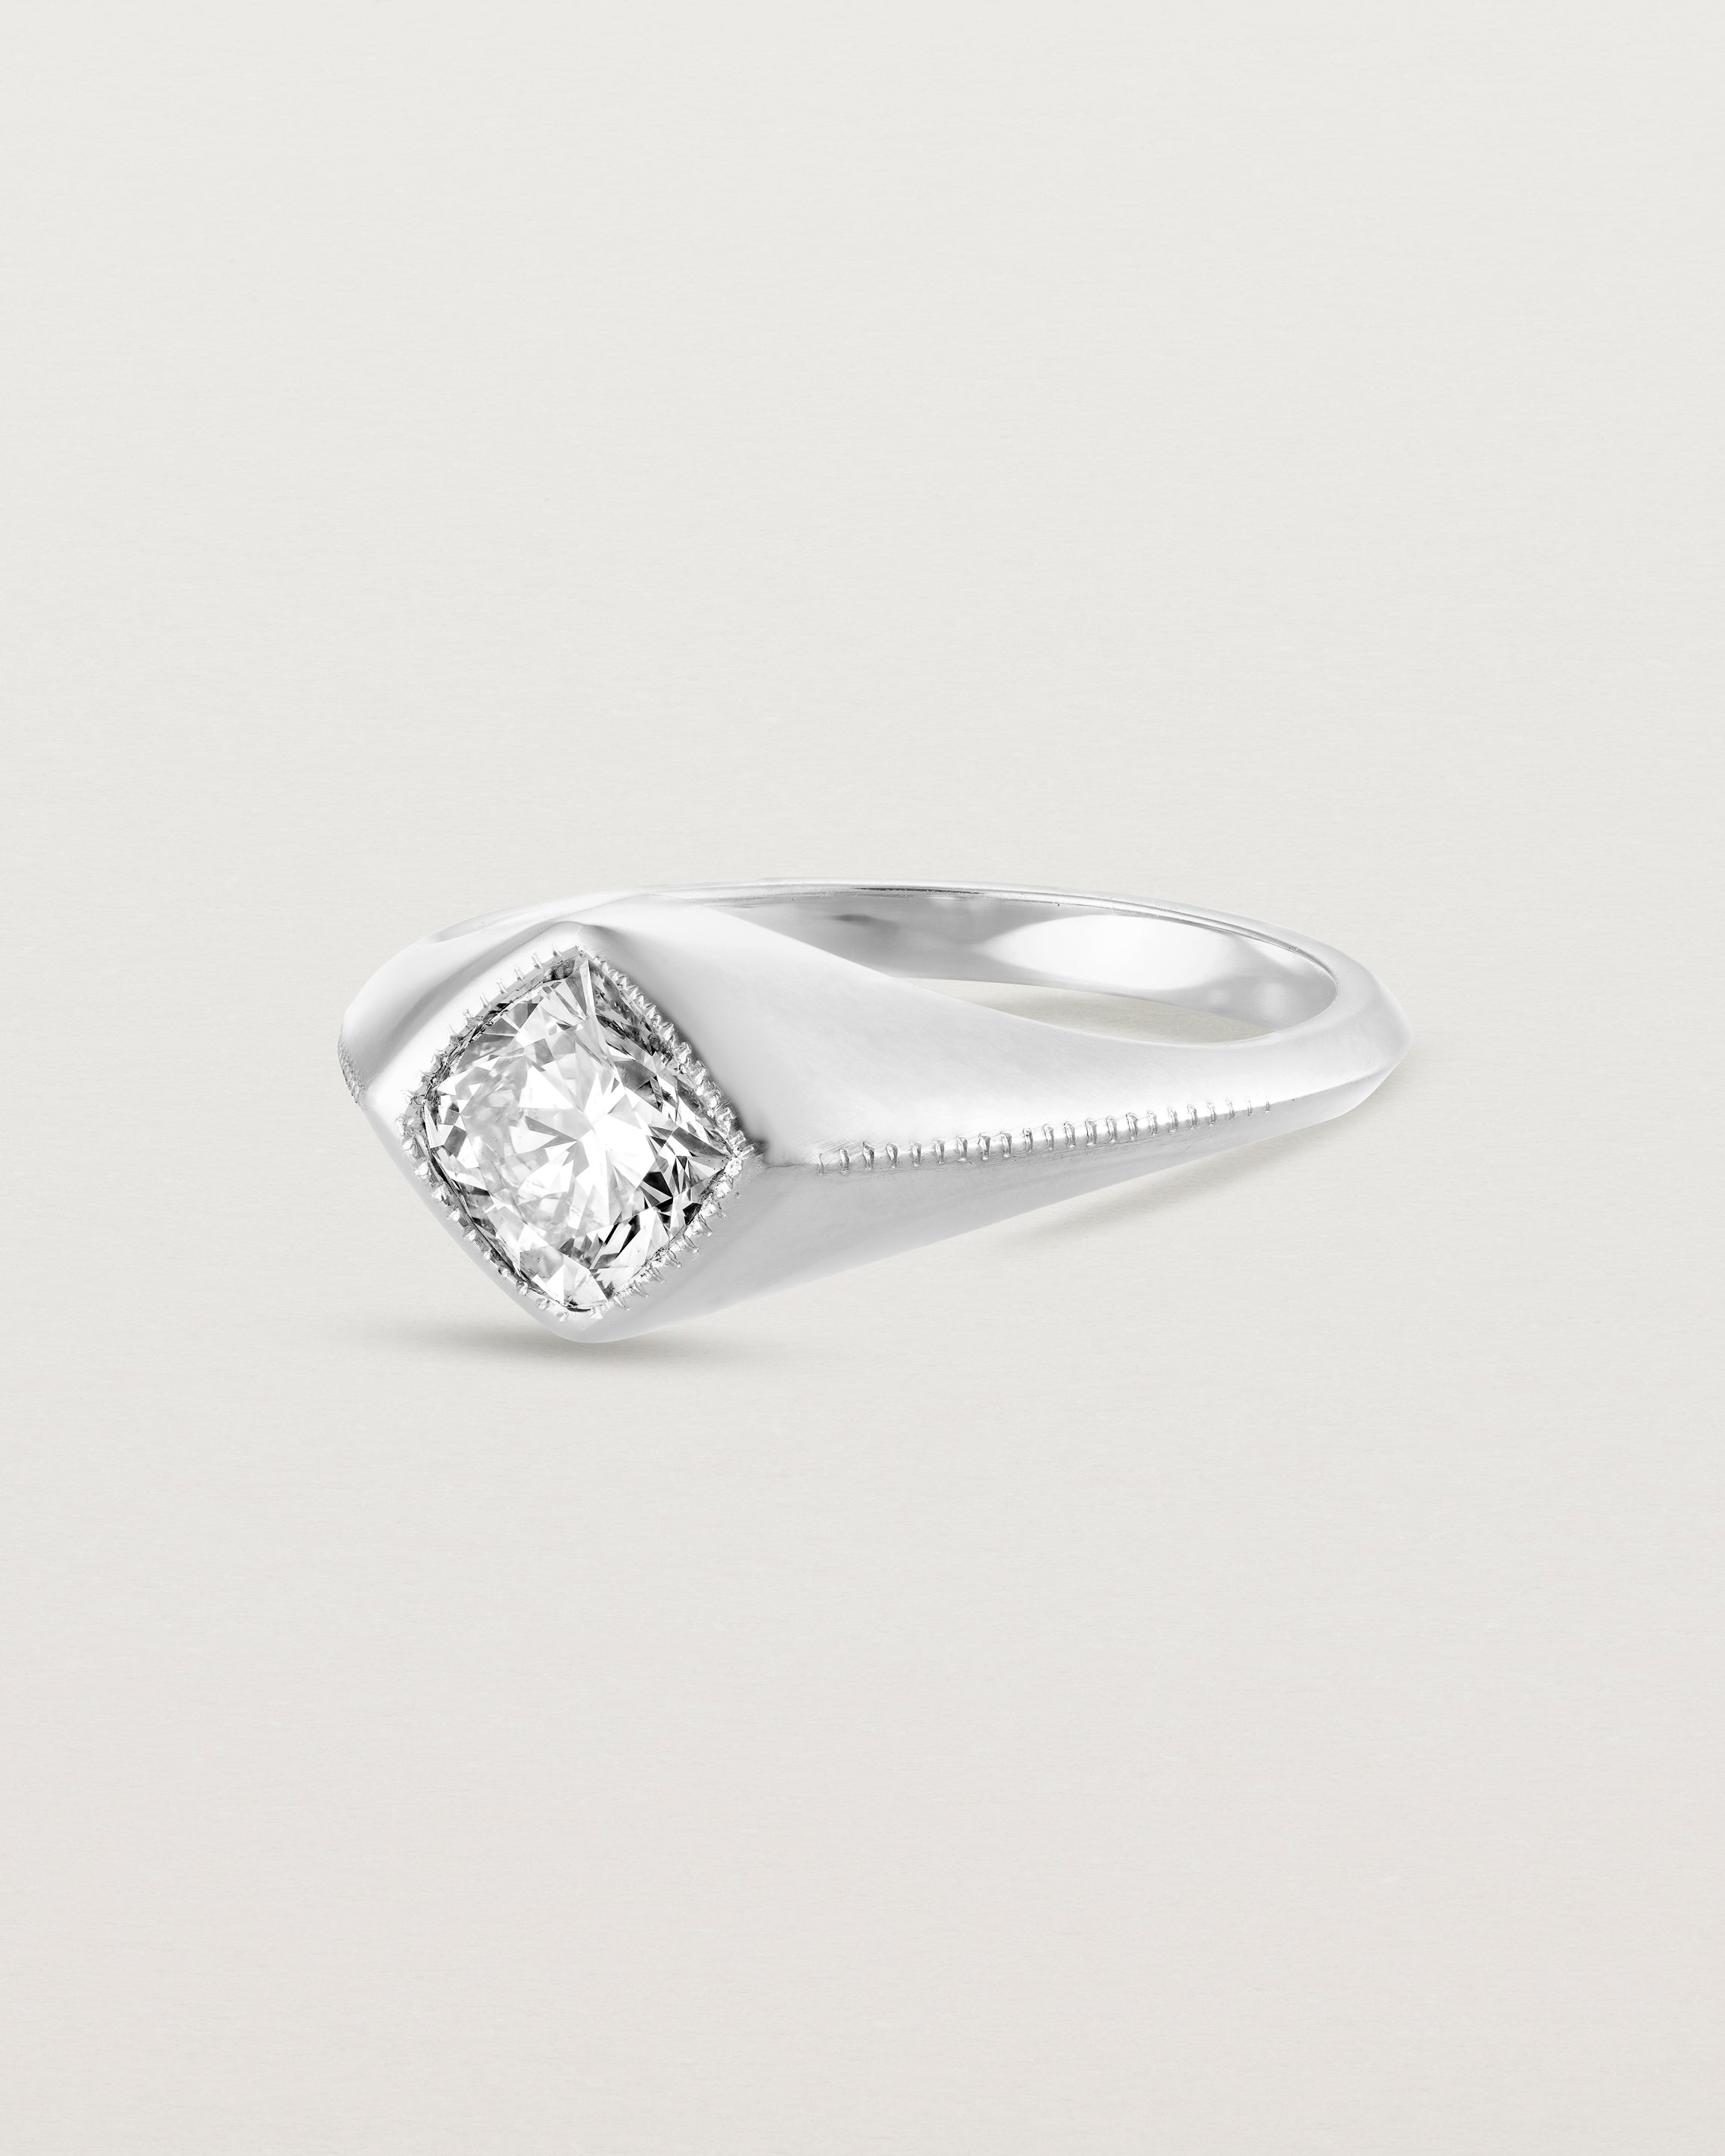 Angled view of the Átlas Cushion Signet | Laboratory Grown Diamond in white gold.